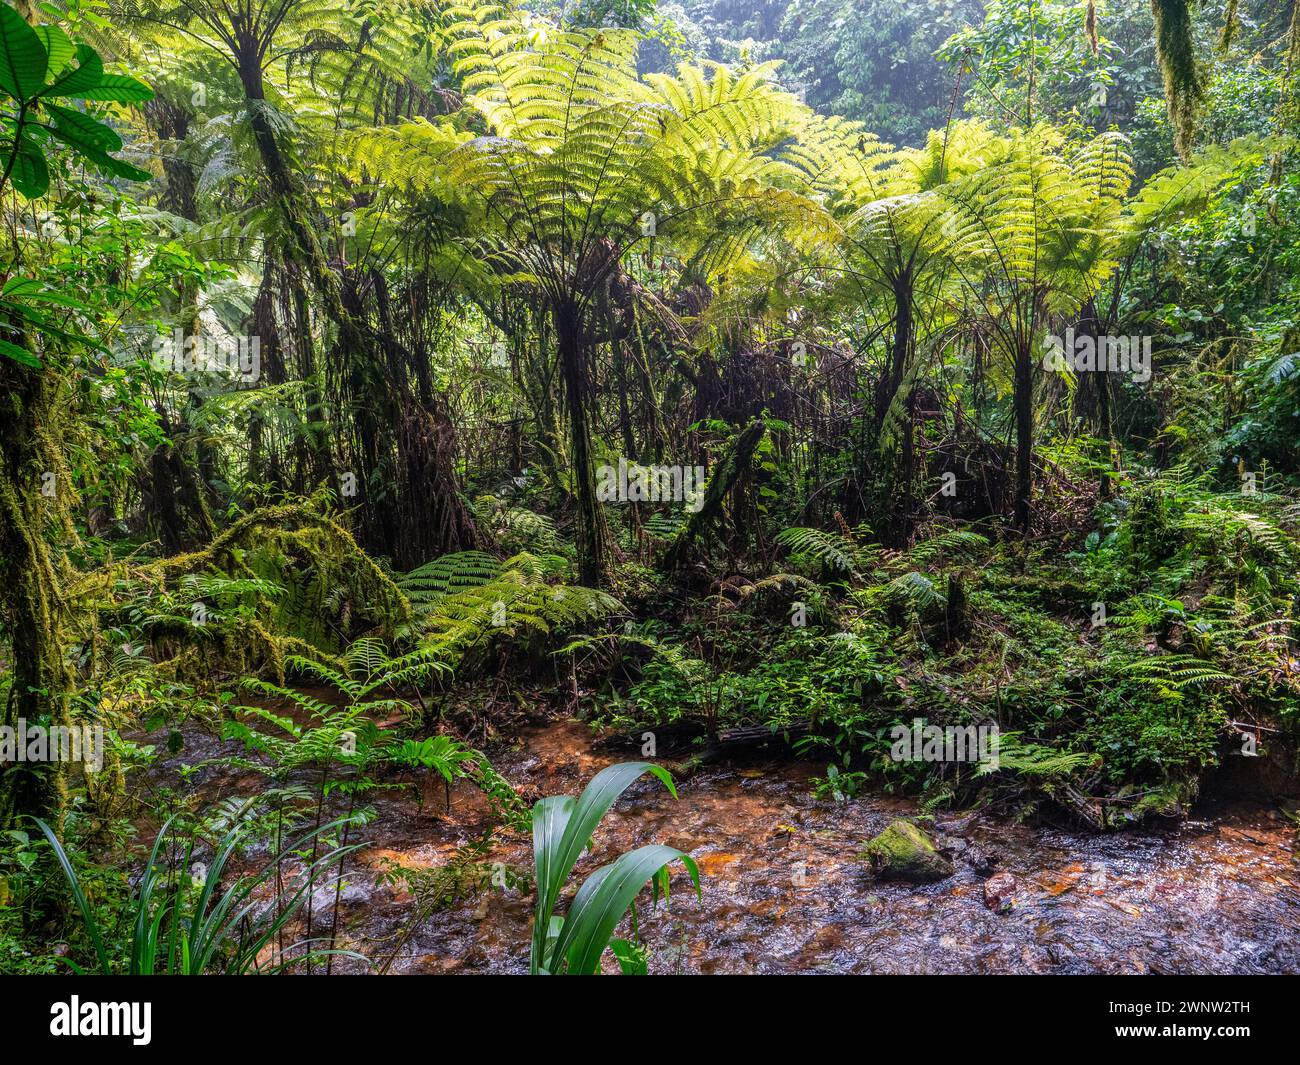 Stream in the rainforest in Bwindi National Park. Lianas in the foreground. Stock Photo